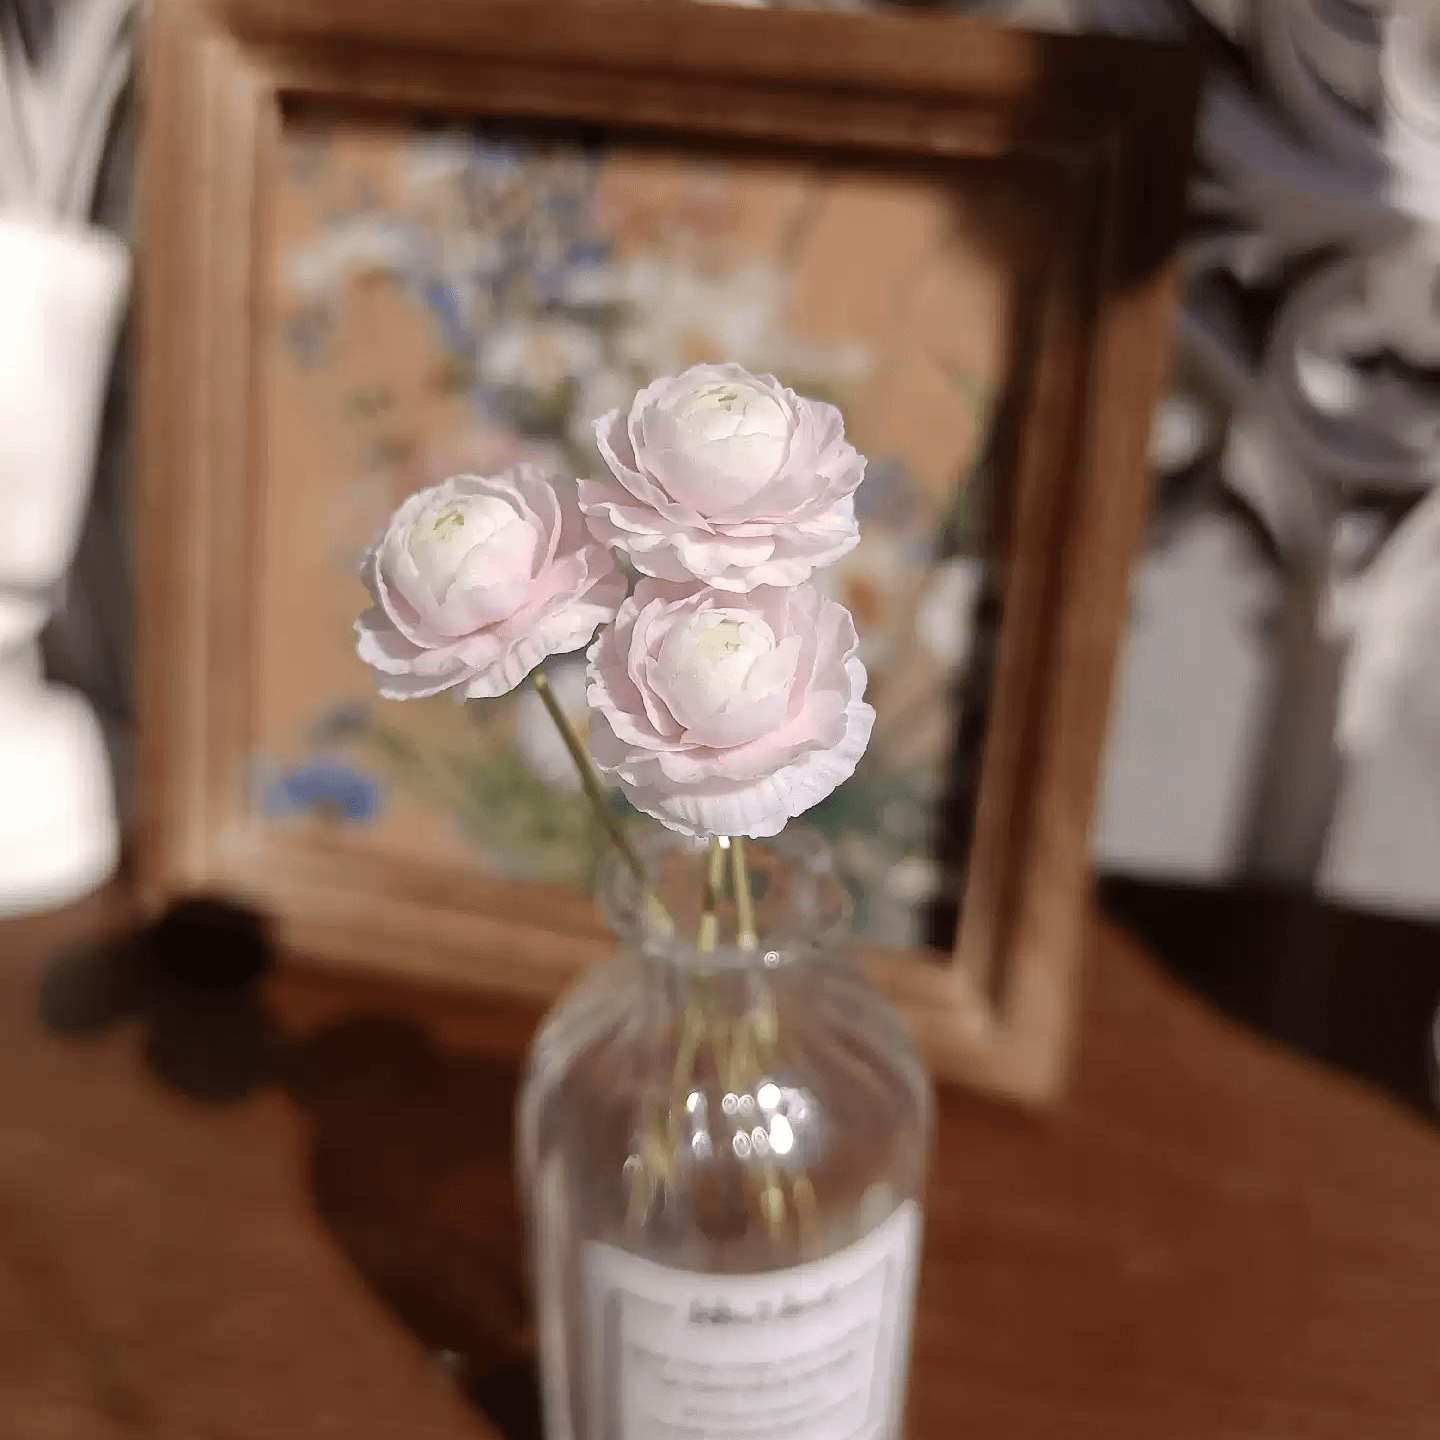 Ranunculus asiaticus, commonly called Persian buttercup, is a tuberous-rooted plant that blooms in late spring to early summer. Miniature for dolls, dollhouses, roomboxes. Suitable for Blythe, Barbie, Paola,and other dolls with a height of 25-40cm (10-15.8 inches). Scale: 1:6; 1:12 Material: Handmade from Clay